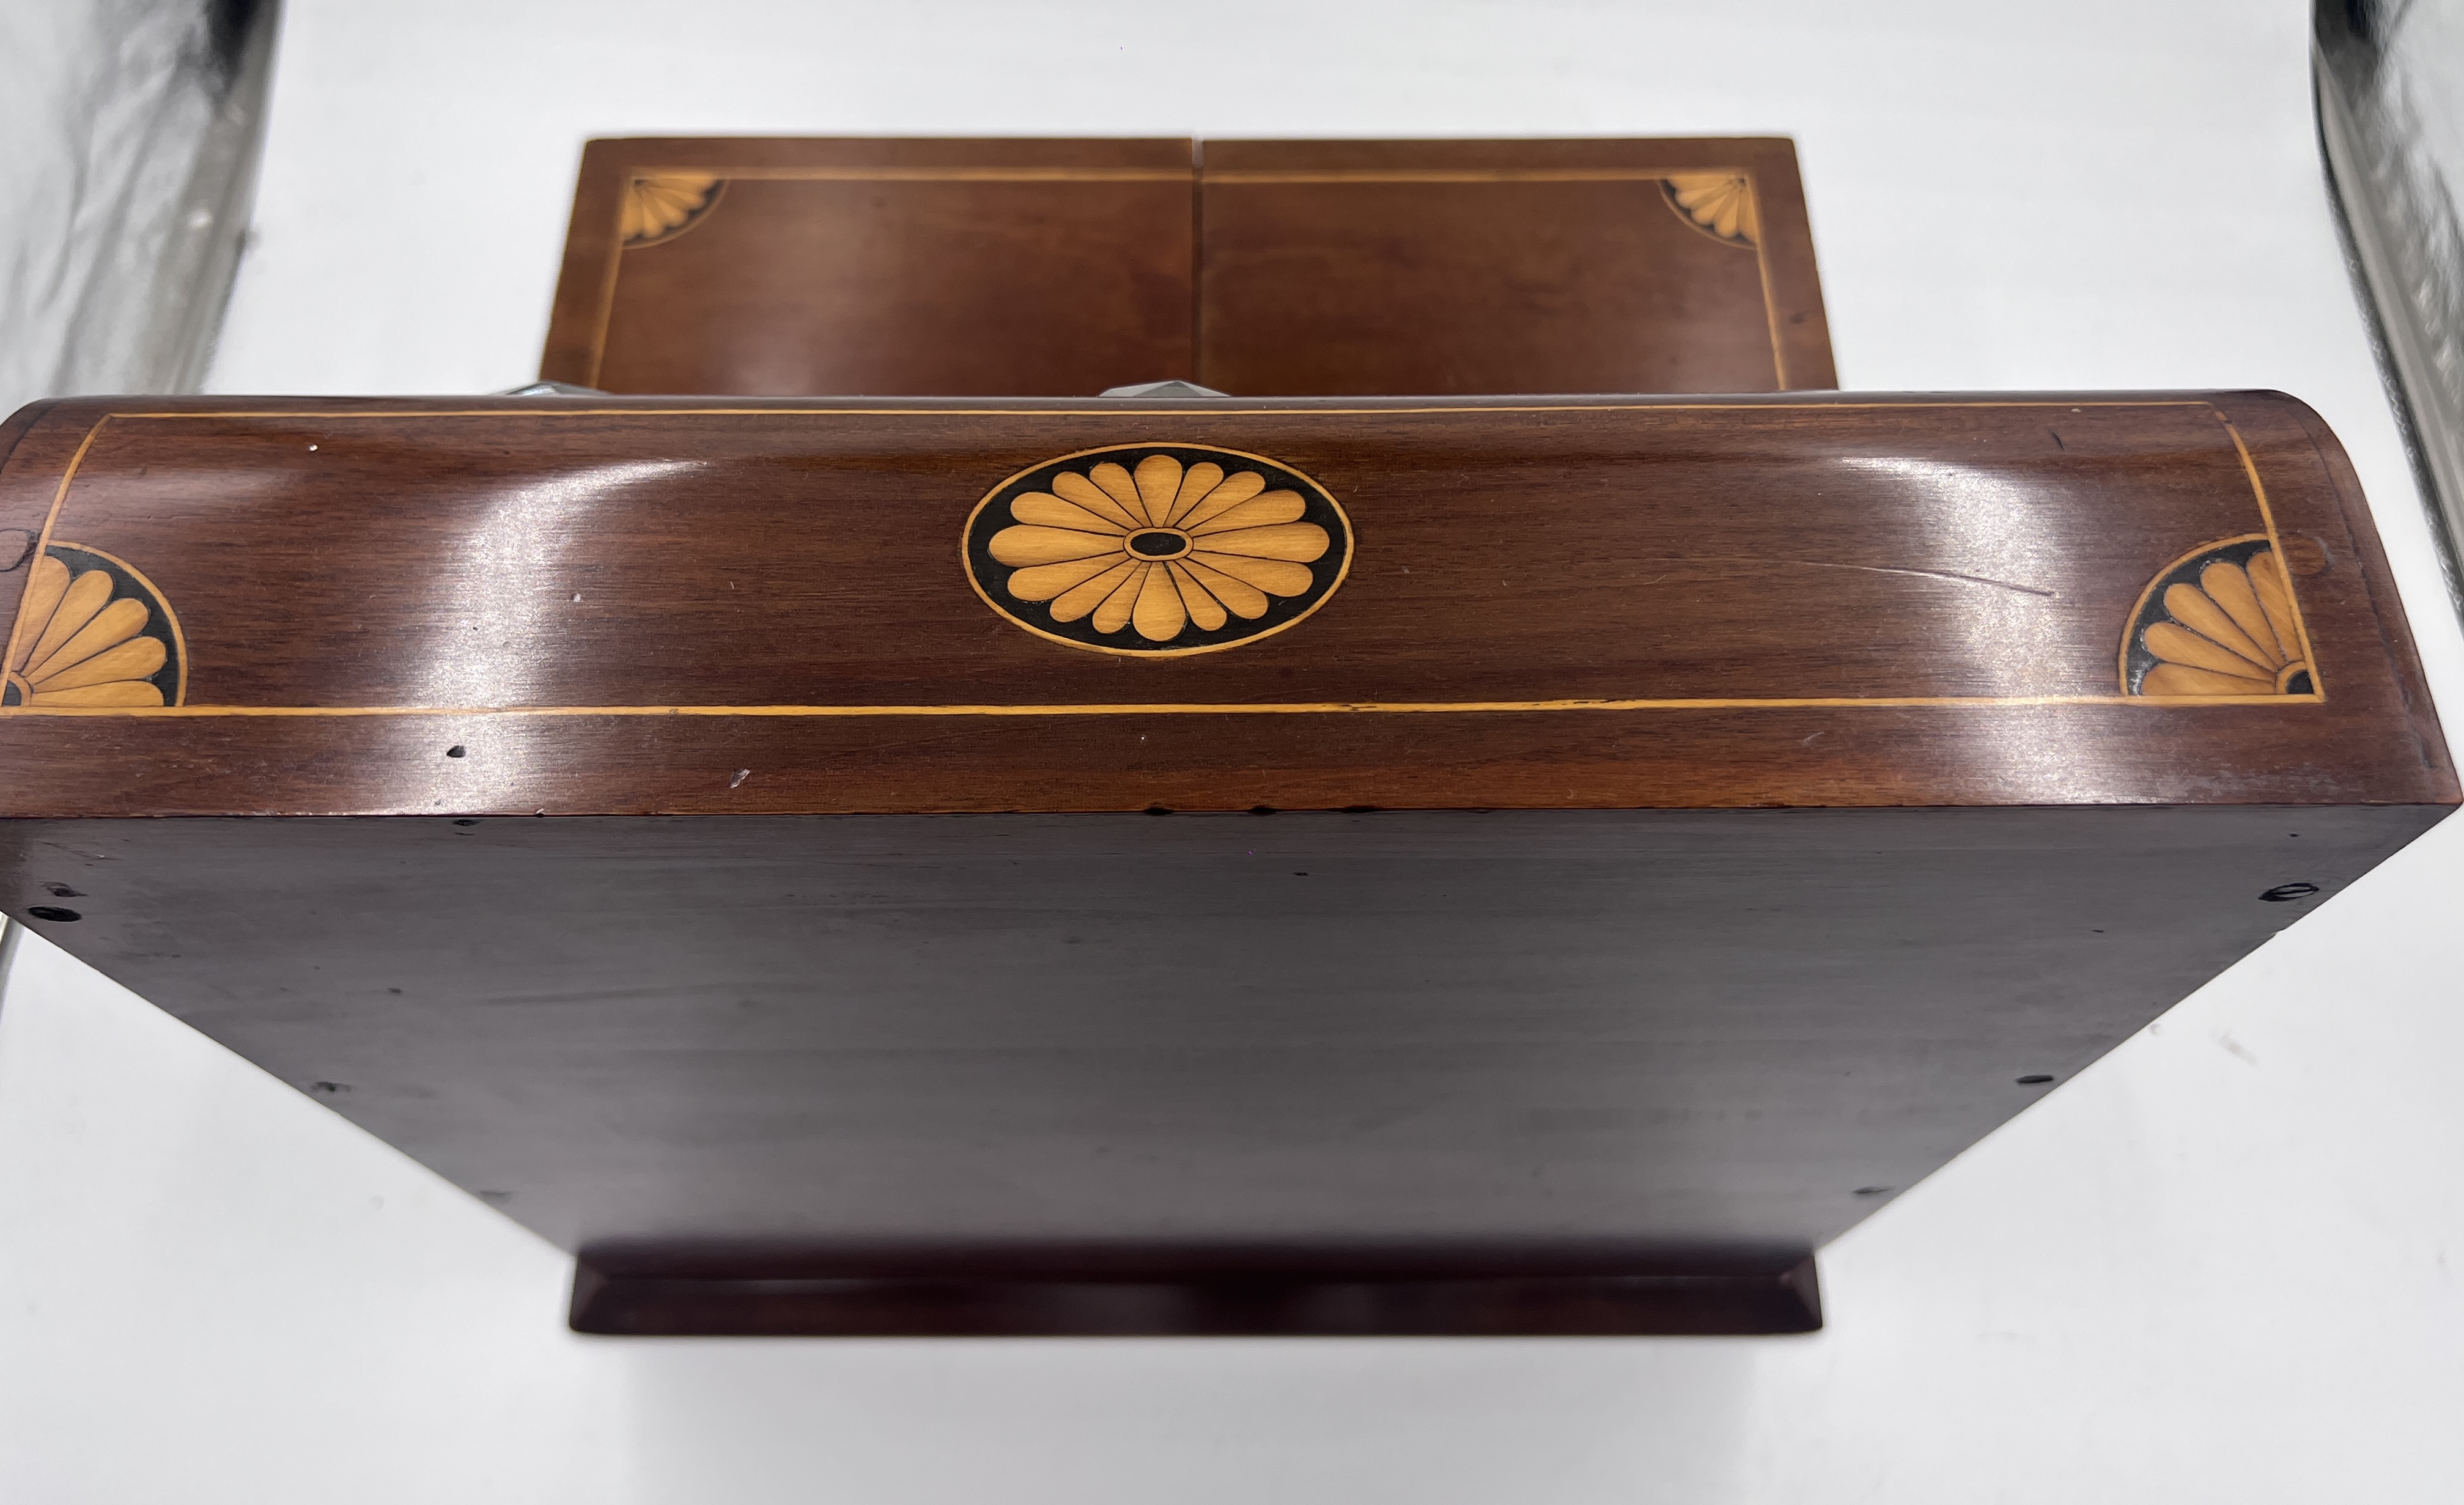 An Edwardian mahogany inlaid cut glass tantalus and games box containing cigar cutter, silver plated - Image 12 of 14